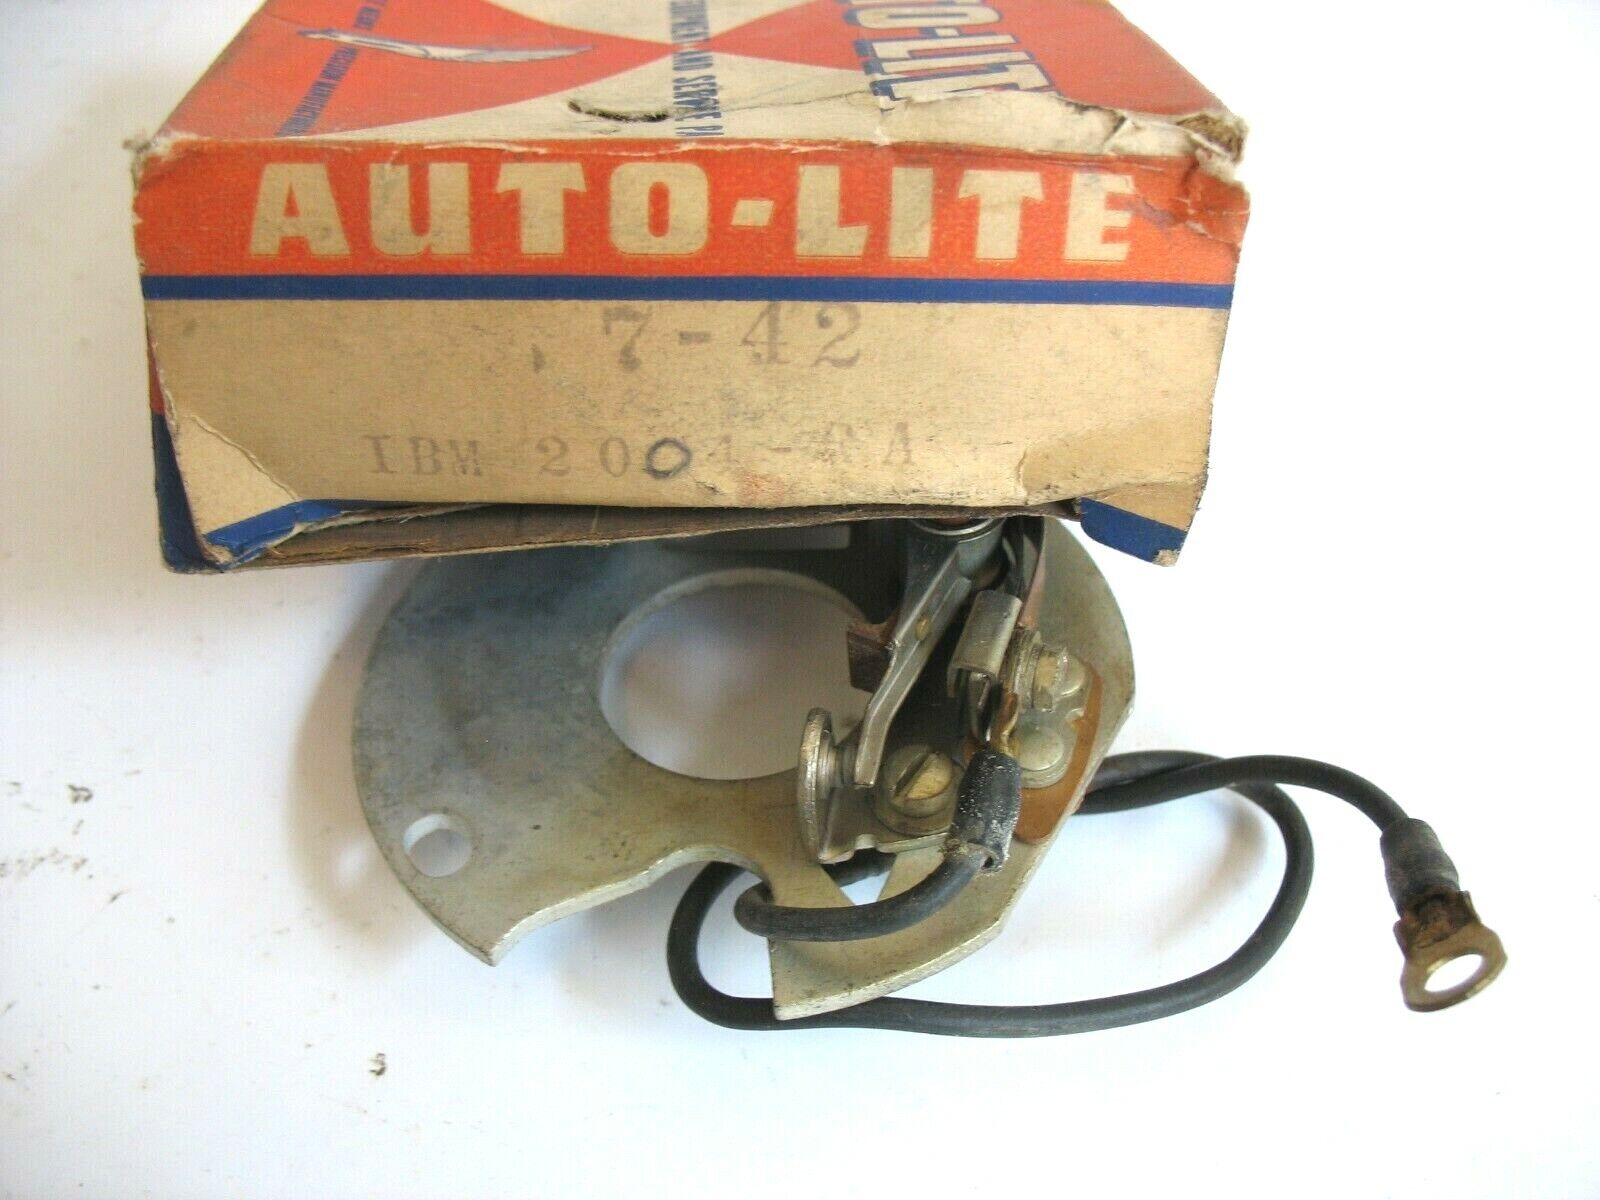 NOS IBM204RA "COULD FIT"   50,51,52 PLYMOUTH DODGE BREAKER PLATE AUTO-LITE